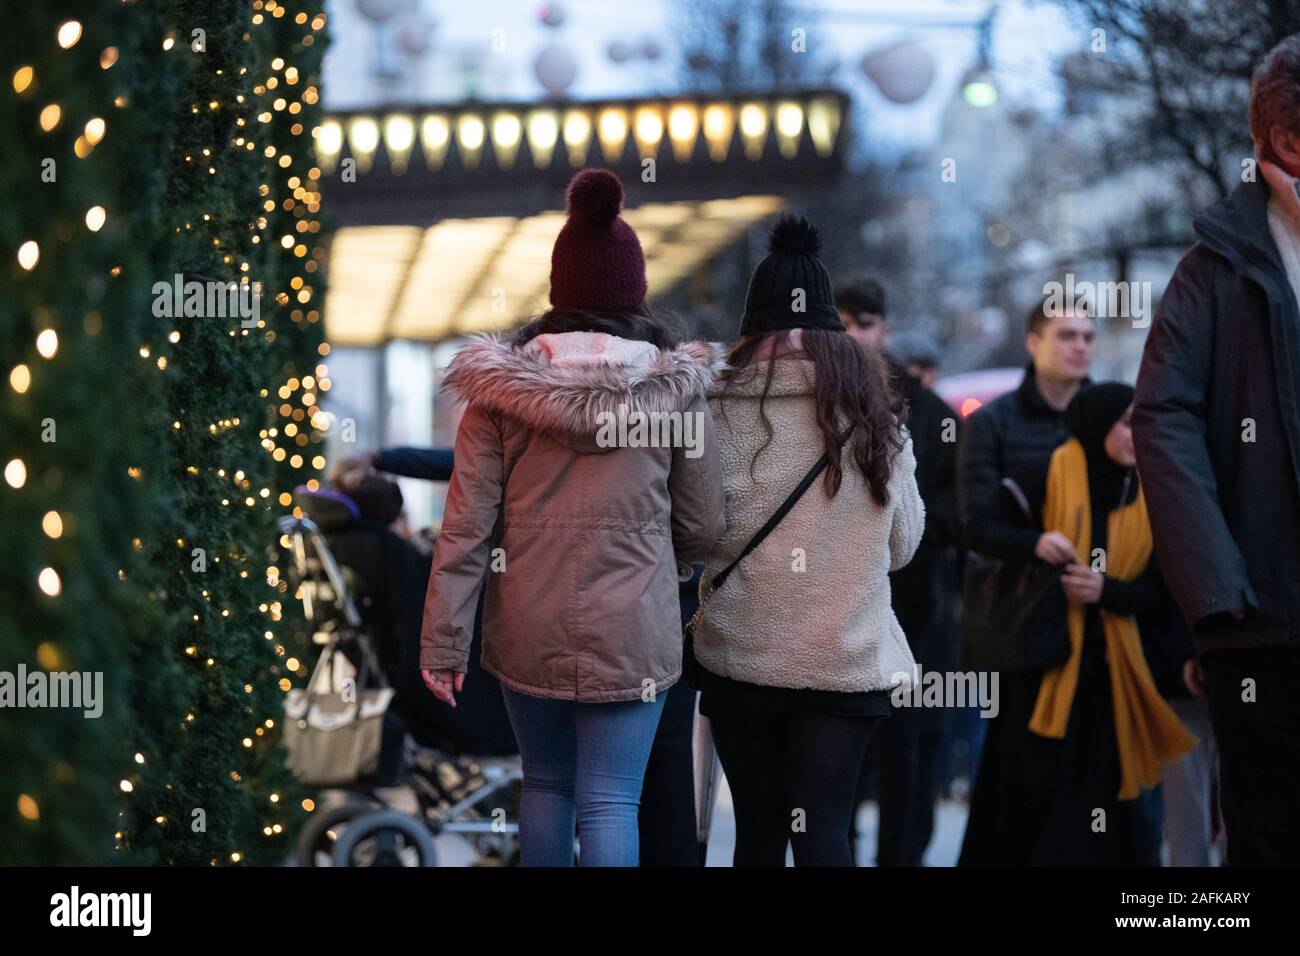 Back of two people wearing winter hats with a bobble walking  towards the iconic entrance of Selfridges, Oxford Street, London, Winter lights in view. Stock Photo